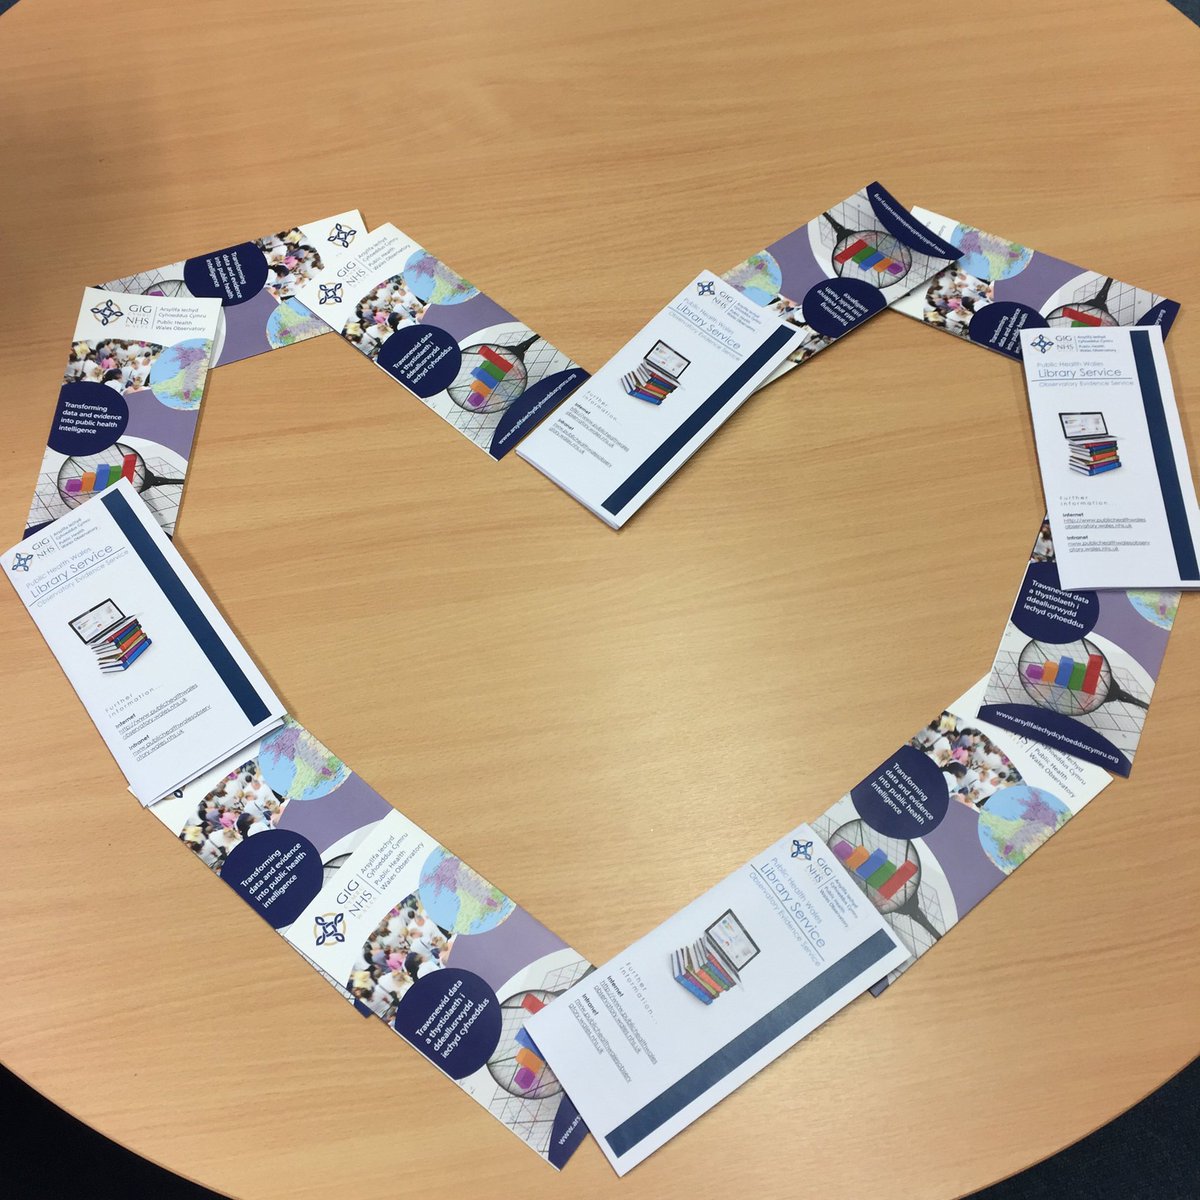 This #valentines day, learn to love research evidence at your #NHS library! #LibraryLoversMonth #evidencebasedresearch